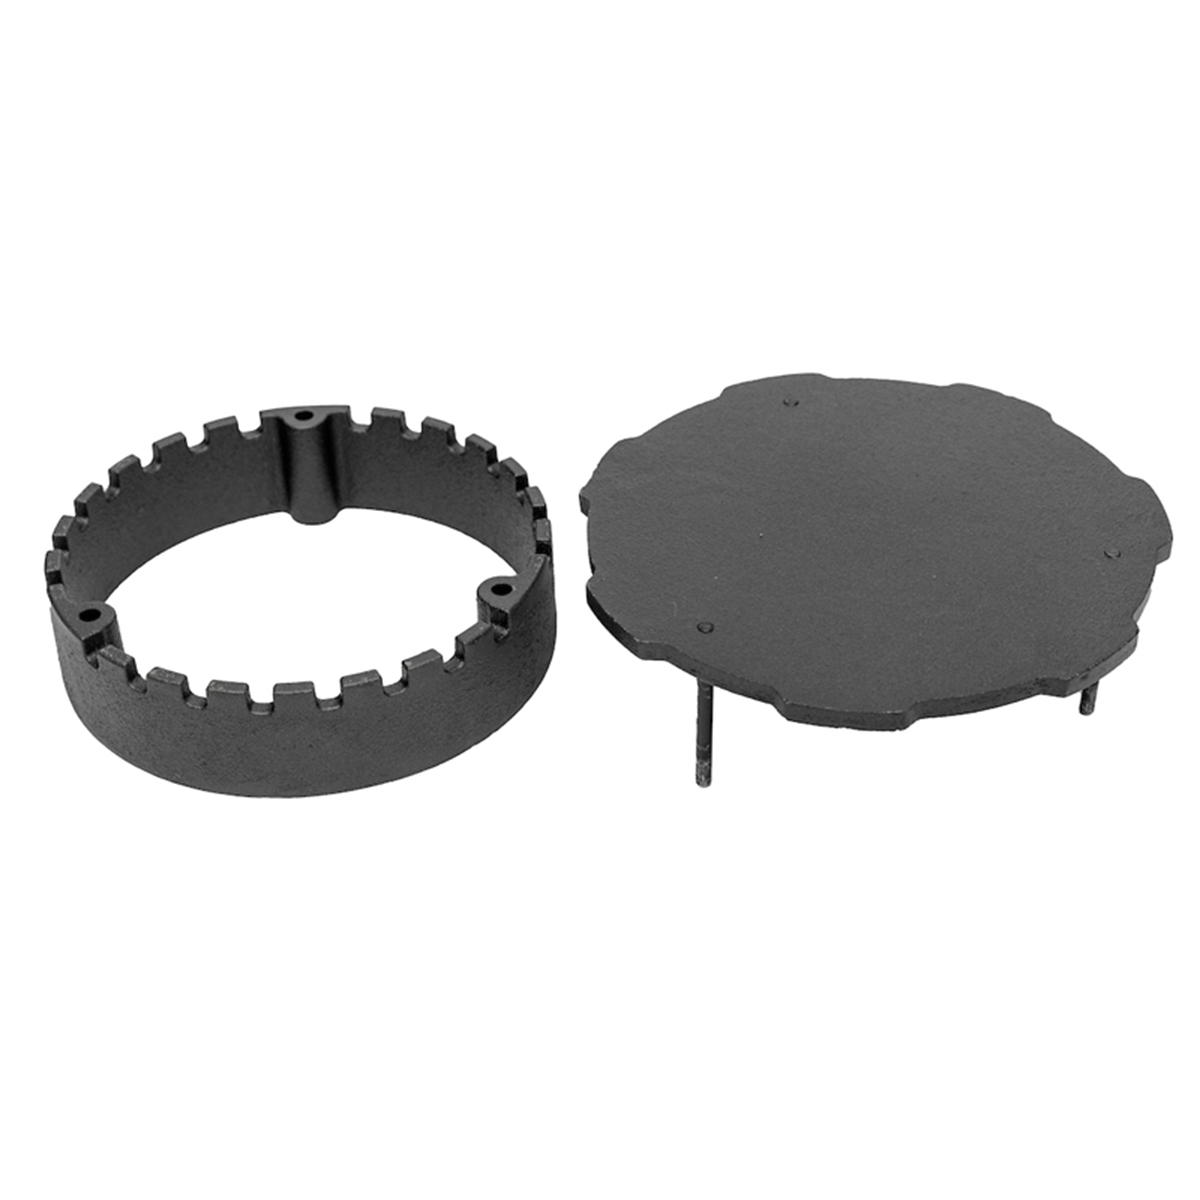 US STOVE COMPANY USSLP31 31-Inch Smokeless Fire Pit